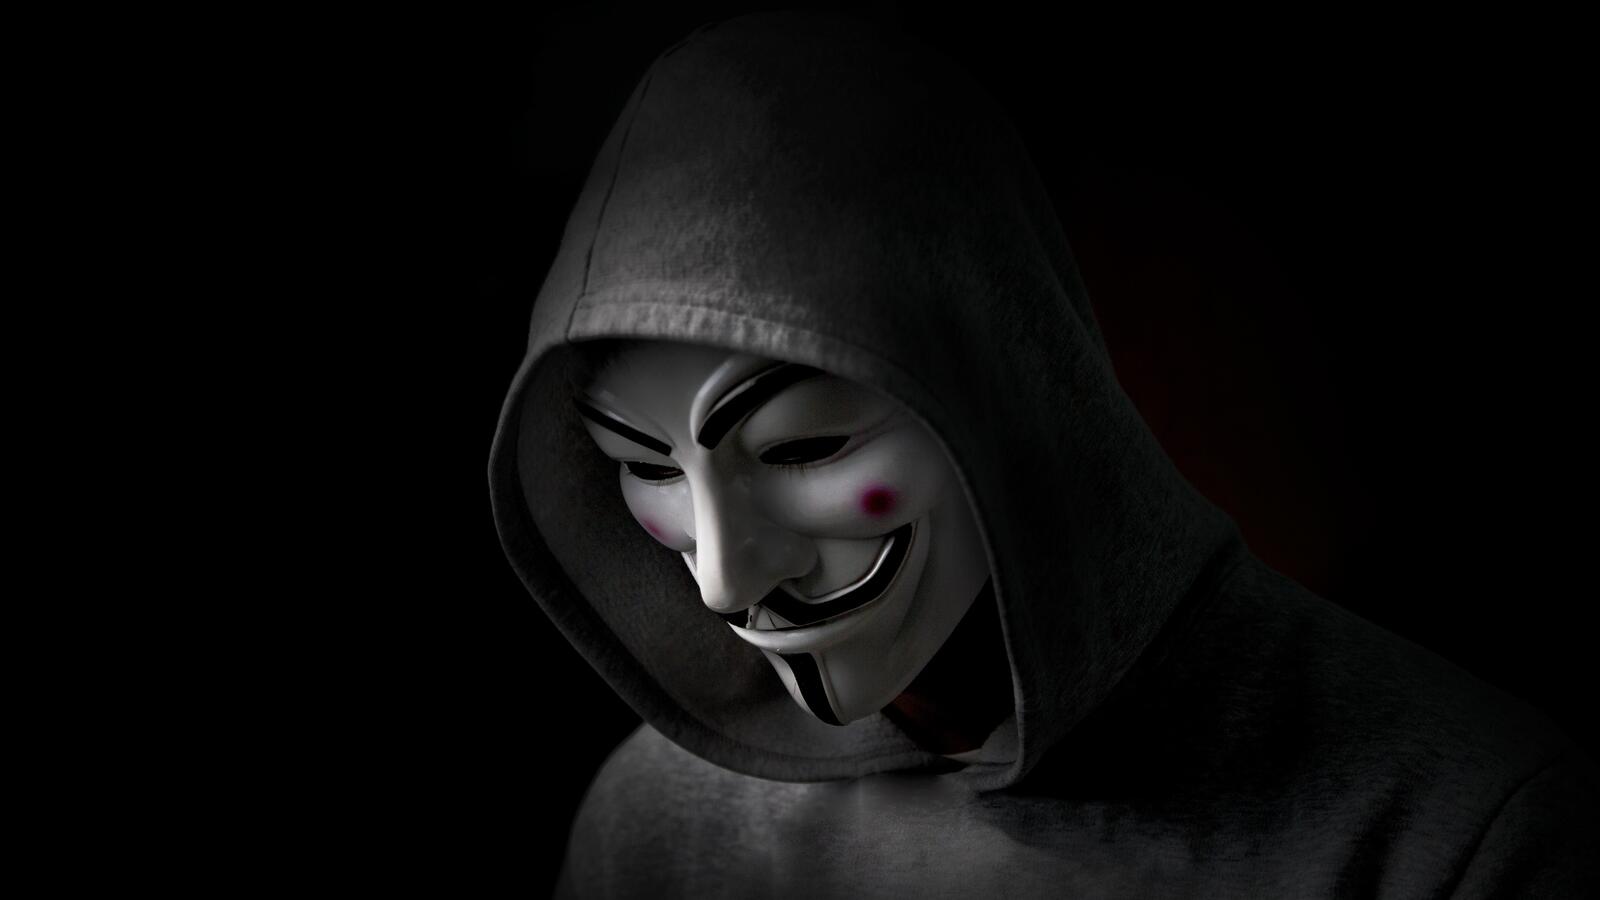 Wallpapers anonymus hacker computer on the desktop